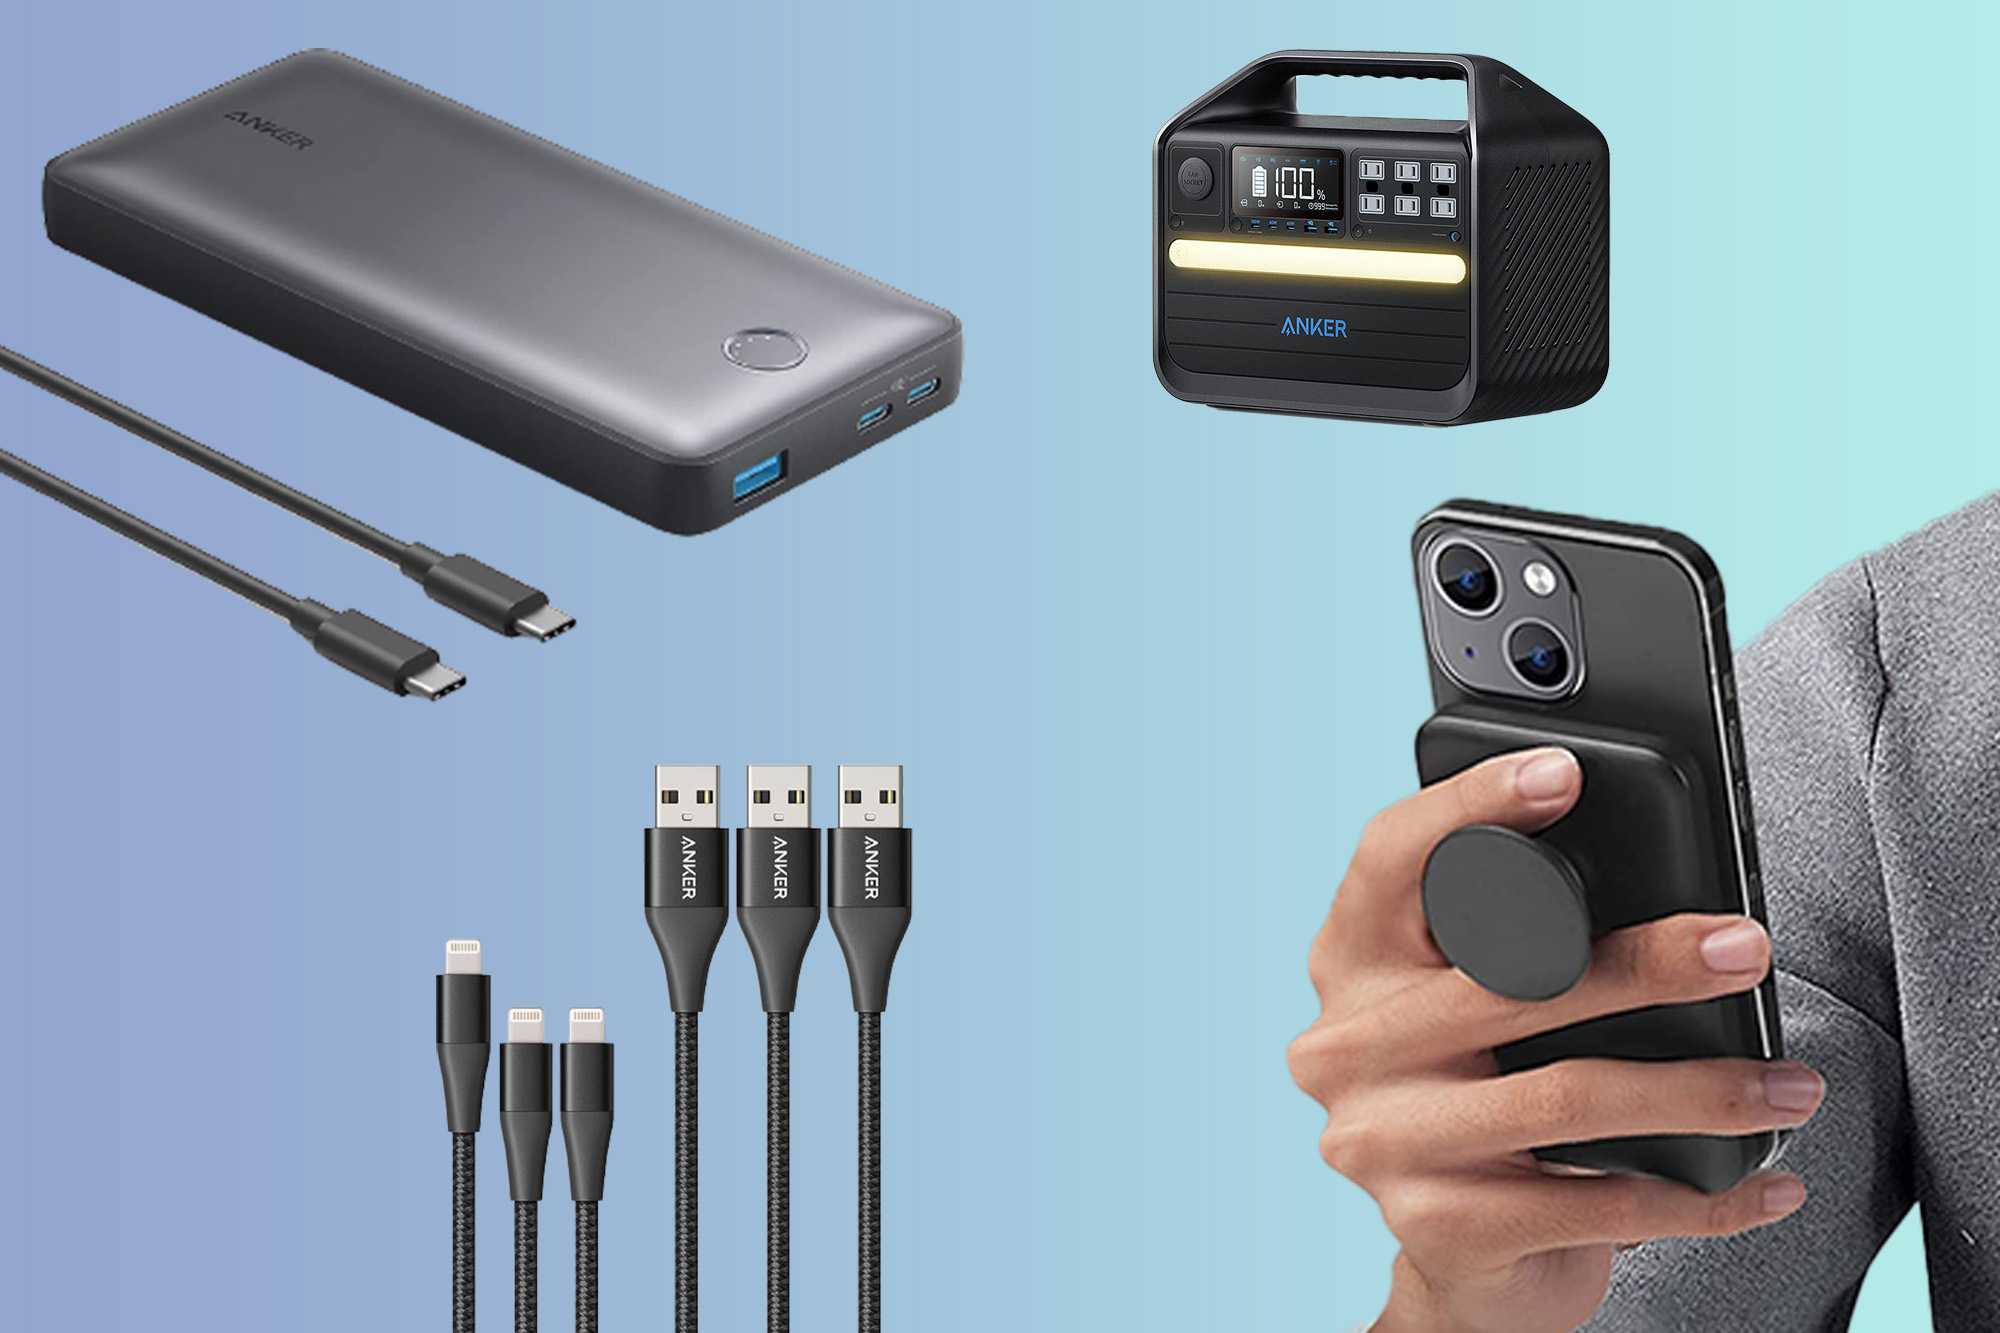 Anker 737 Power Bank, Cell Phone Accessories, Electronics